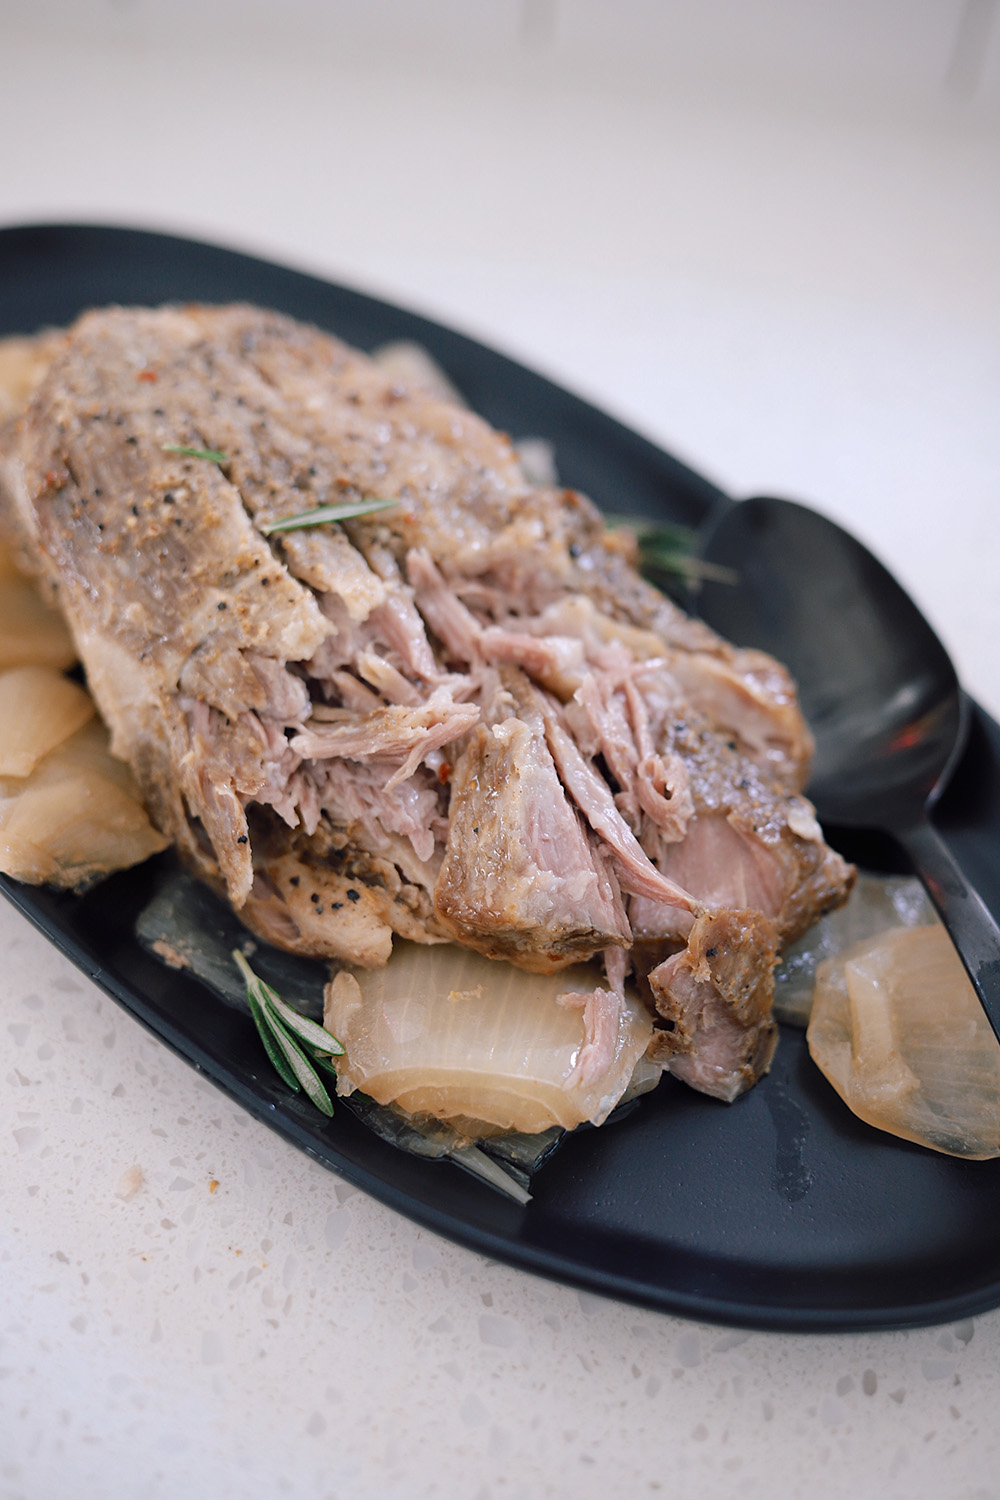 Slow-Cooker-Pork-Roast-Recipe-Incredibly-Tender-with-Just-Four-Ingredients-featured-by-top-US-blogger-Tabitha-Blue-of-Fresh-Mommy-Blog-3